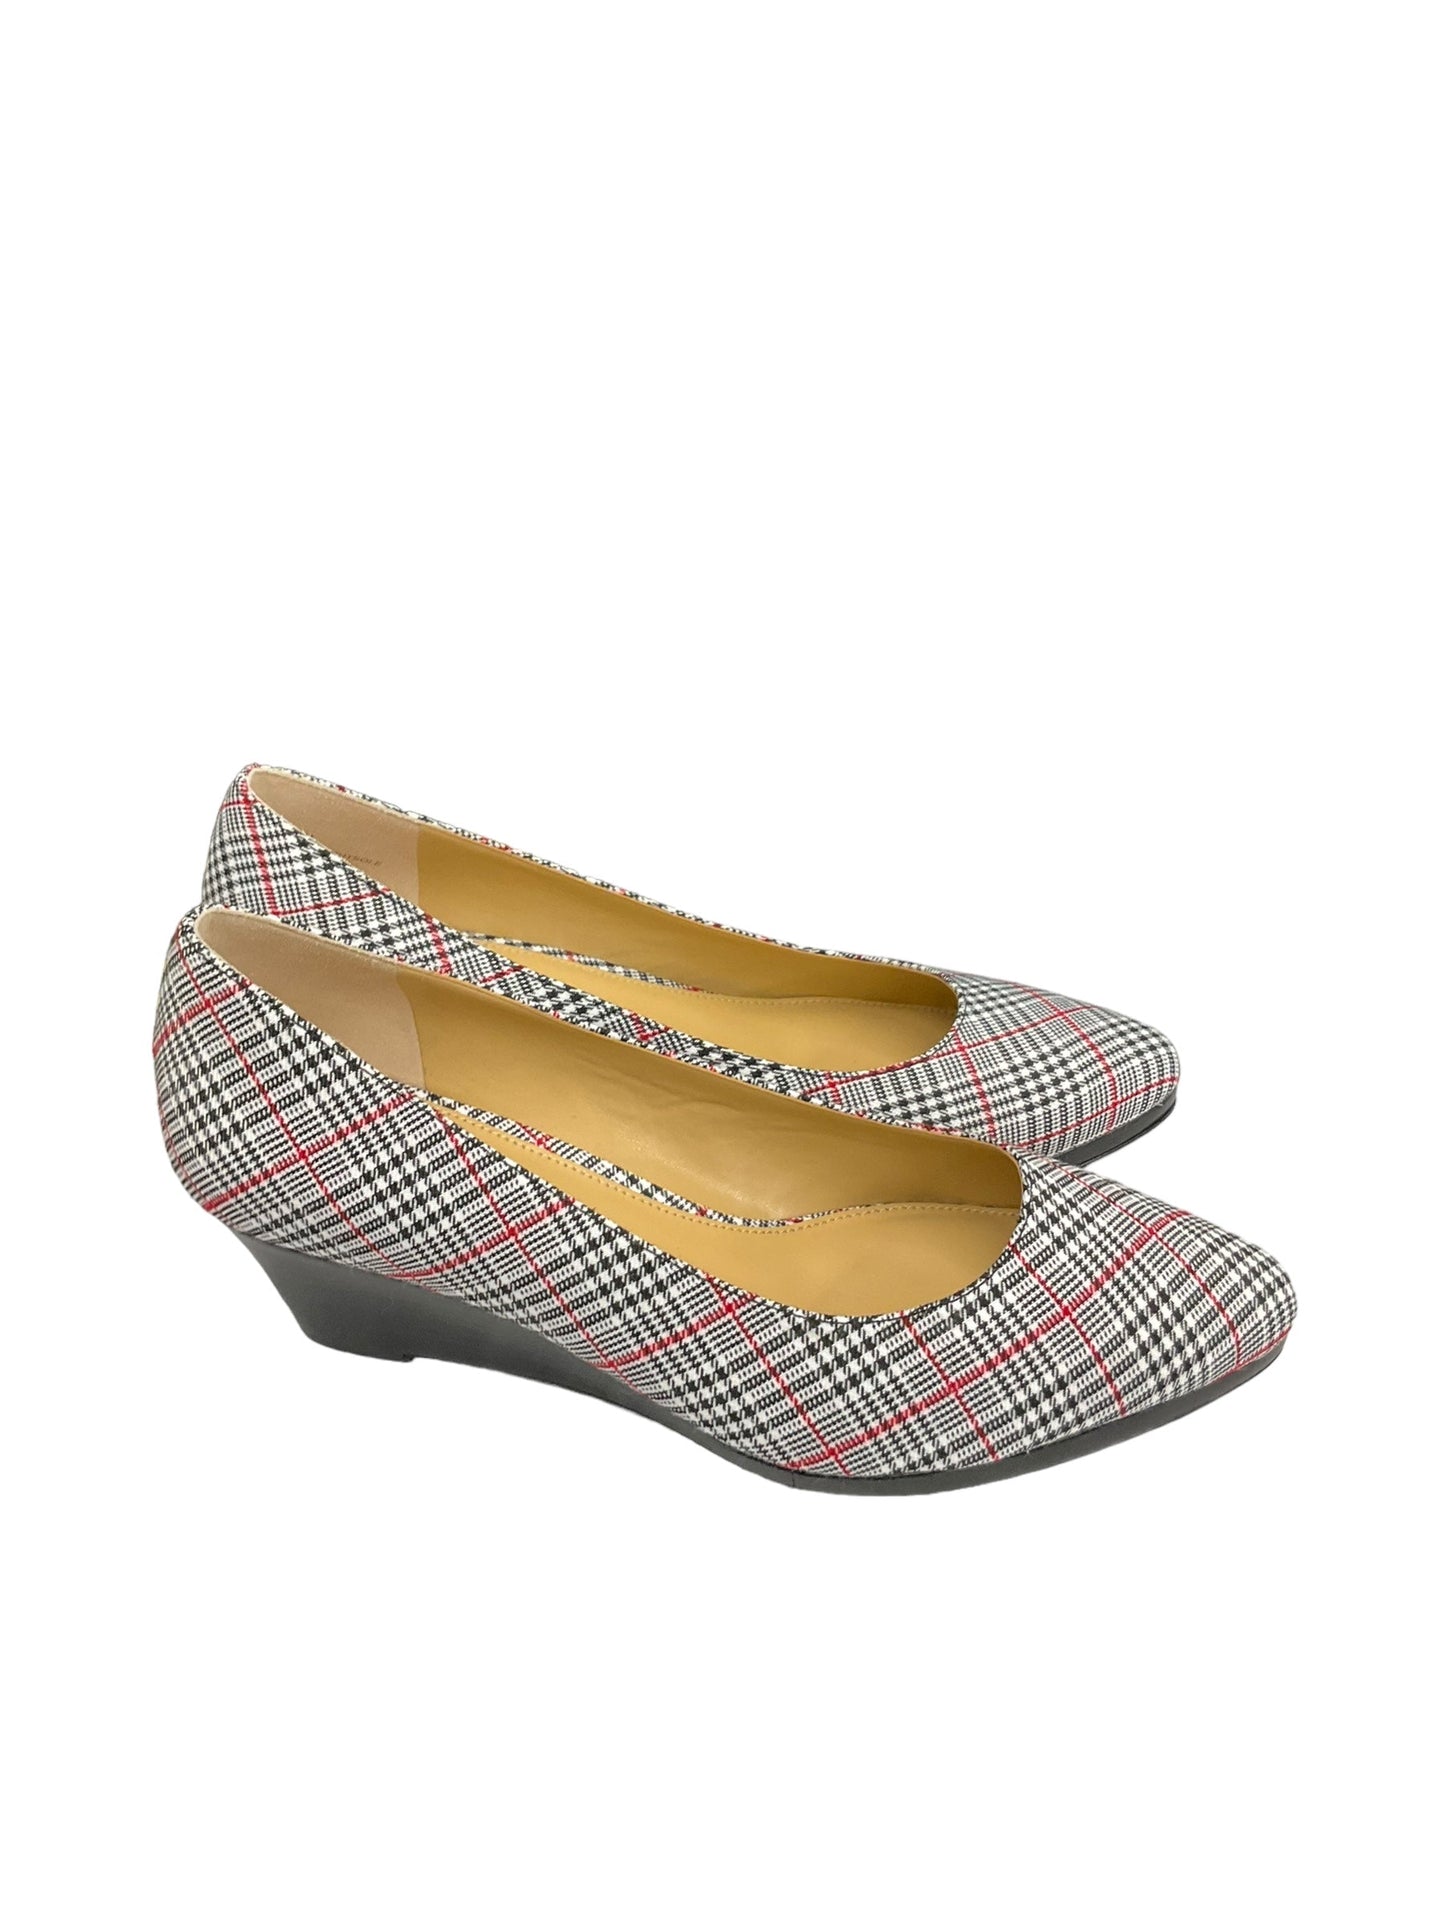 Plaid Pattern Shoes Heels Wedge Talbots, Size 8.5